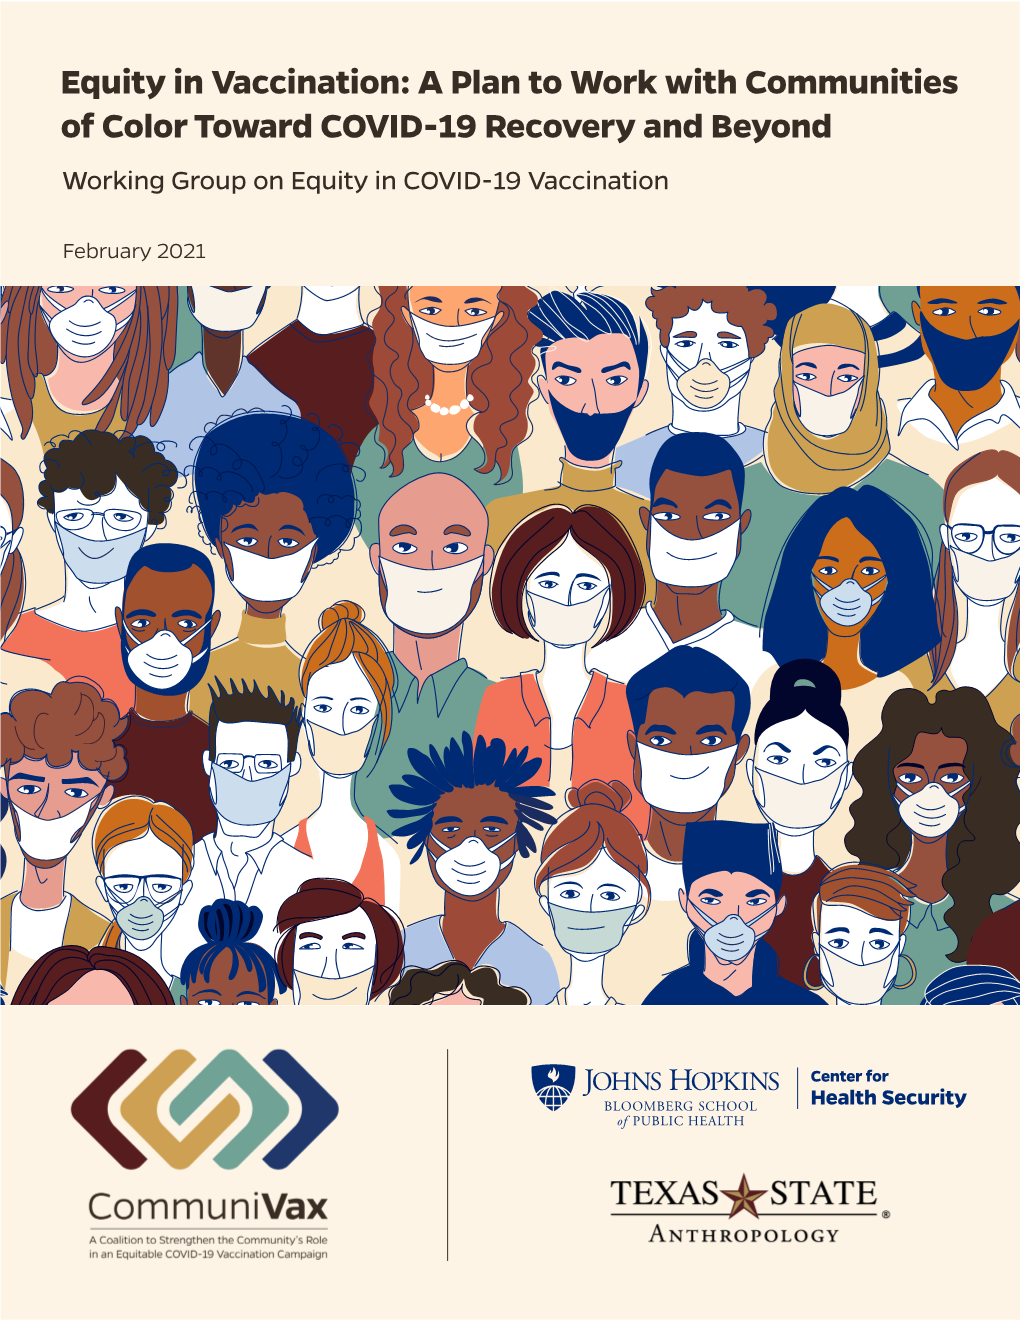 A Plan to Work with Communities of Color Toward COVID-19 Recovery and Beyond Working Group on Equity in COVID-19 Vaccination